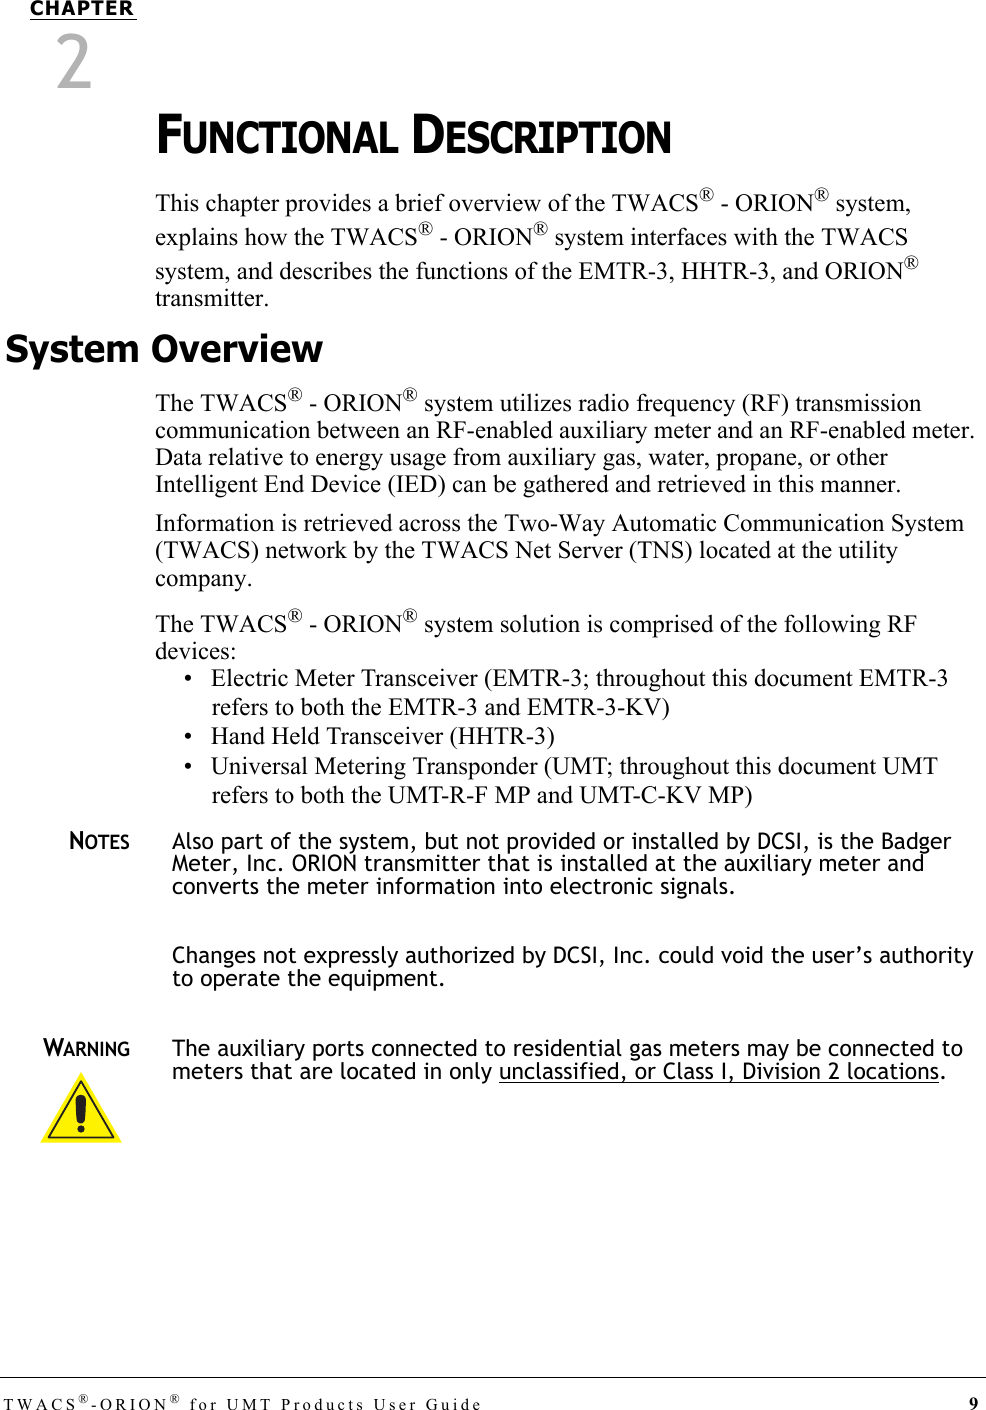 TWACS®-ORION® for UMT Products User Guide 9CHAPTER2FUNCTIONAL DESCRIPTIONThis chapter provides a brief overview of the TWACS® - ORION® system, explains how the TWACS® - ORION® system interfaces with the TWACS system, and describes the functions of the EMTR-3, HHTR-3, and ORION® transmitter. System OverviewThe TWACS® - ORION® system utilizes radio frequency (RF) transmission communication between an RF-enabled auxiliary meter and an RF-enabled meter. Data relative to energy usage from auxiliary gas, water, propane, or other Intelligent End Device (IED) can be gathered and retrieved in this manner. Information is retrieved across the Two-Way Automatic Communication System (TWACS) network by the TWACS Net Server (TNS) located at the utility company. The TWACS® - ORION® system solution is comprised of the following RF devices:• Electric Meter Transceiver (EMTR-3; throughout this document EMTR-3 refers to both the EMTR-3 and EMTR-3-KV)• Hand Held Transceiver (HHTR-3)• Universal Metering Transponder (UMT; throughout this document UMT refers to both the UMT-R-F MP and UMT-C-KV MP)NOTESAlso part of the system, but not provided or installed by DCSI, is the Badger Meter, Inc. ORION transmitter that is installed at the auxiliary meter and converts the meter information into electronic signals.Changes not expressly authorized by DCSI, Inc. could void the user’s authority to operate the equipment.WARNINGThe auxiliary ports connected to residential gas meters may be connected to meters that are located in only unclassified, or Class I, Division 2 locations. DRAFT